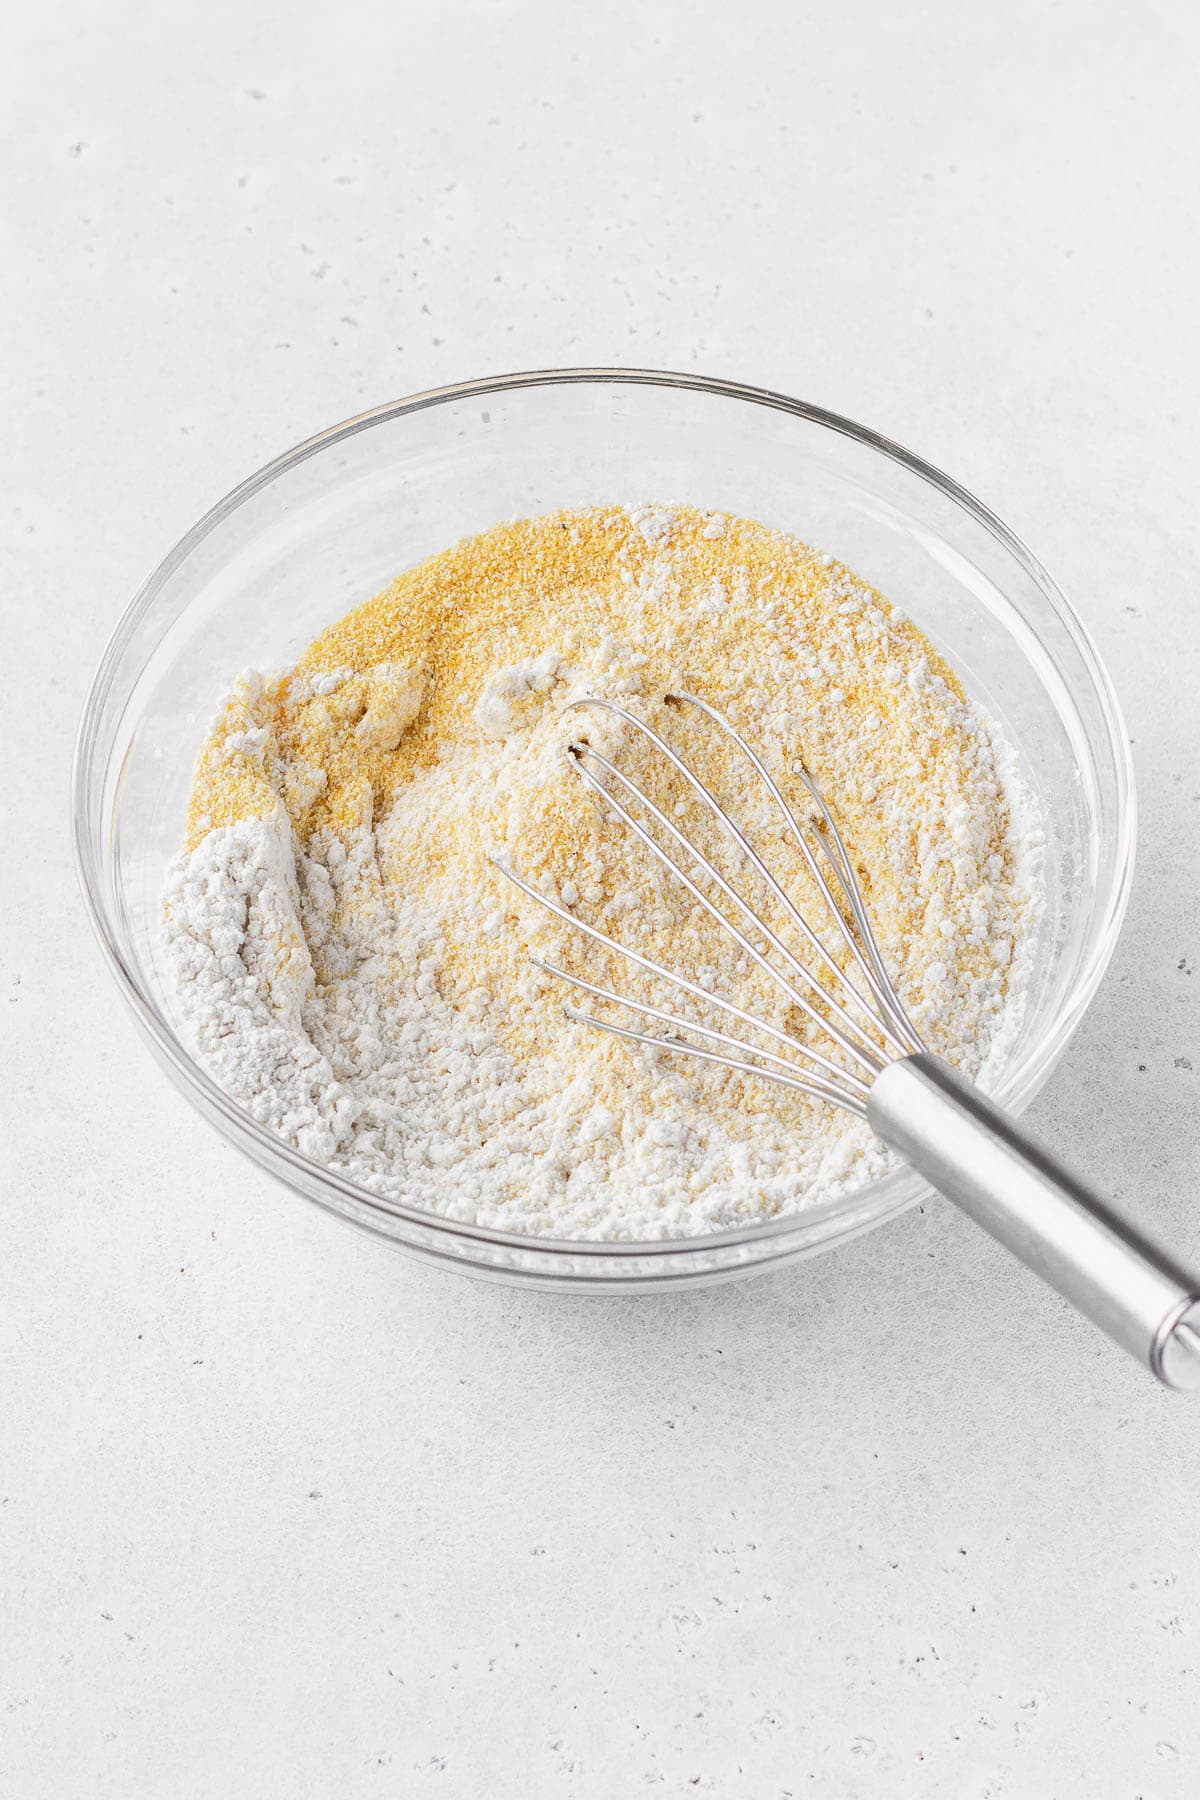 Whisking the dry cornbread ingredients together in a glass mixing bowl.